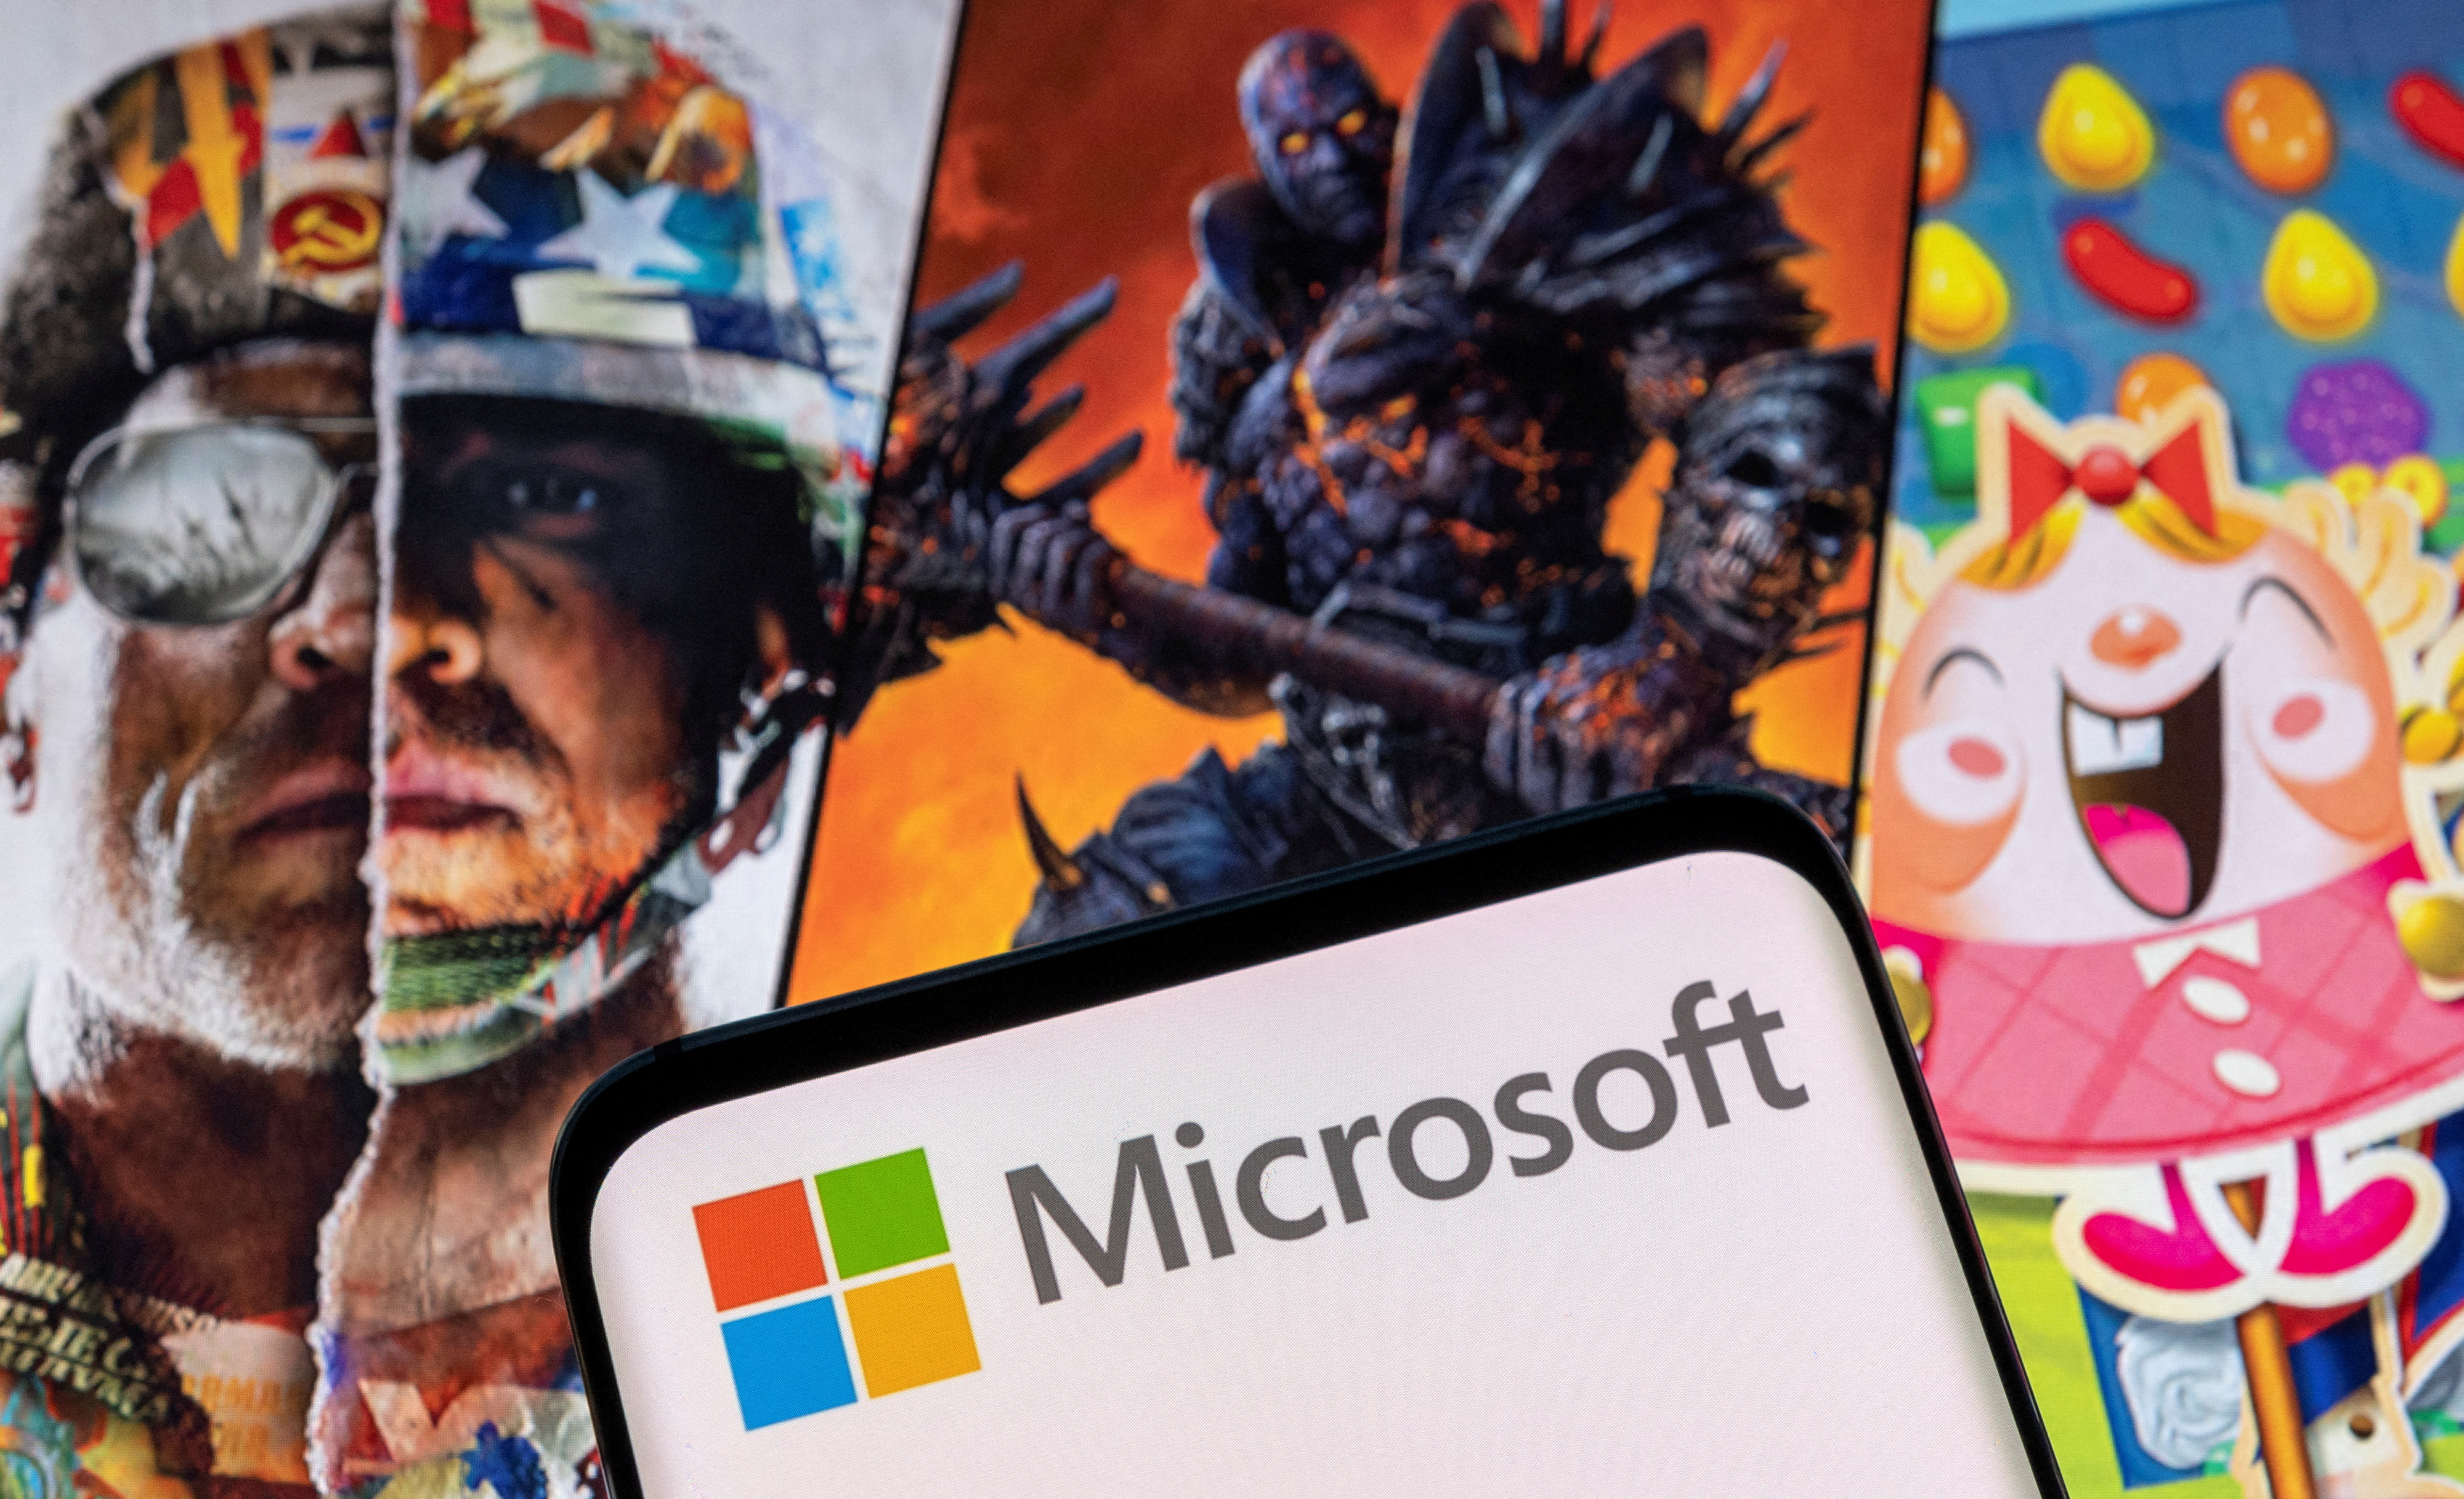 Microsoft's purchase of Activision Blizzard shows the company is